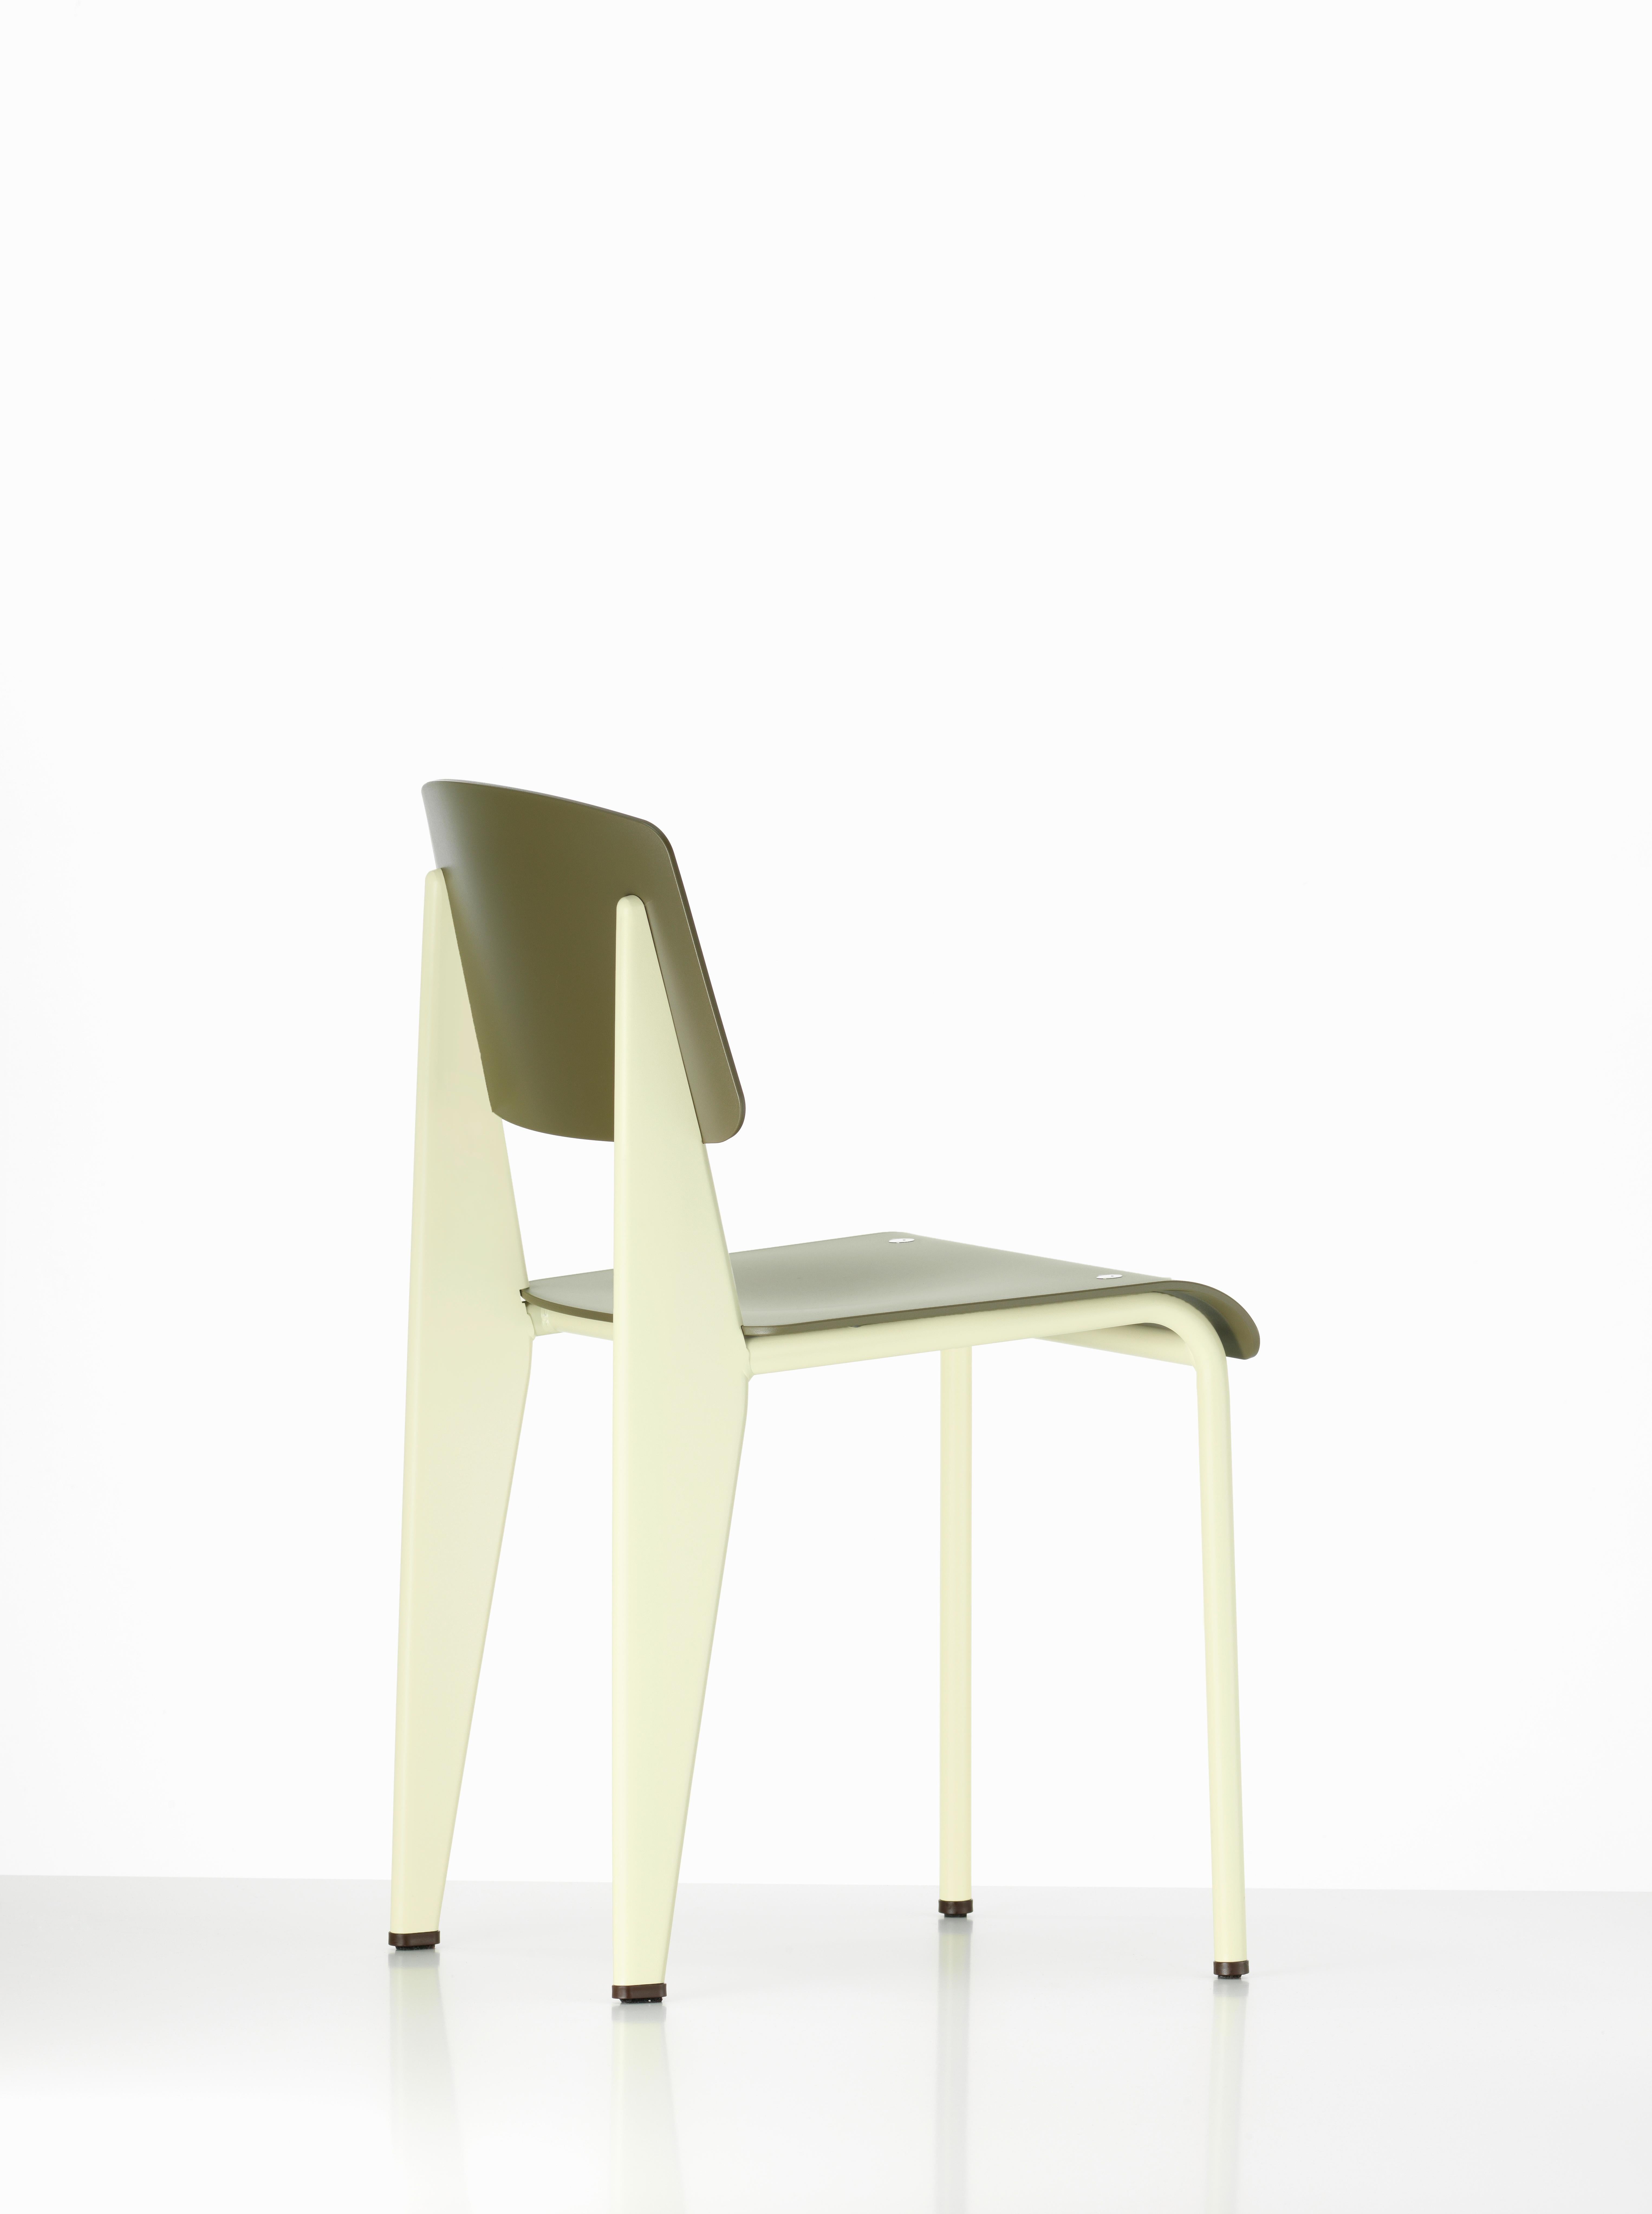 Plastic Jean Prouvé Standard Chair SP in Teak Brown and Mint for Vitra